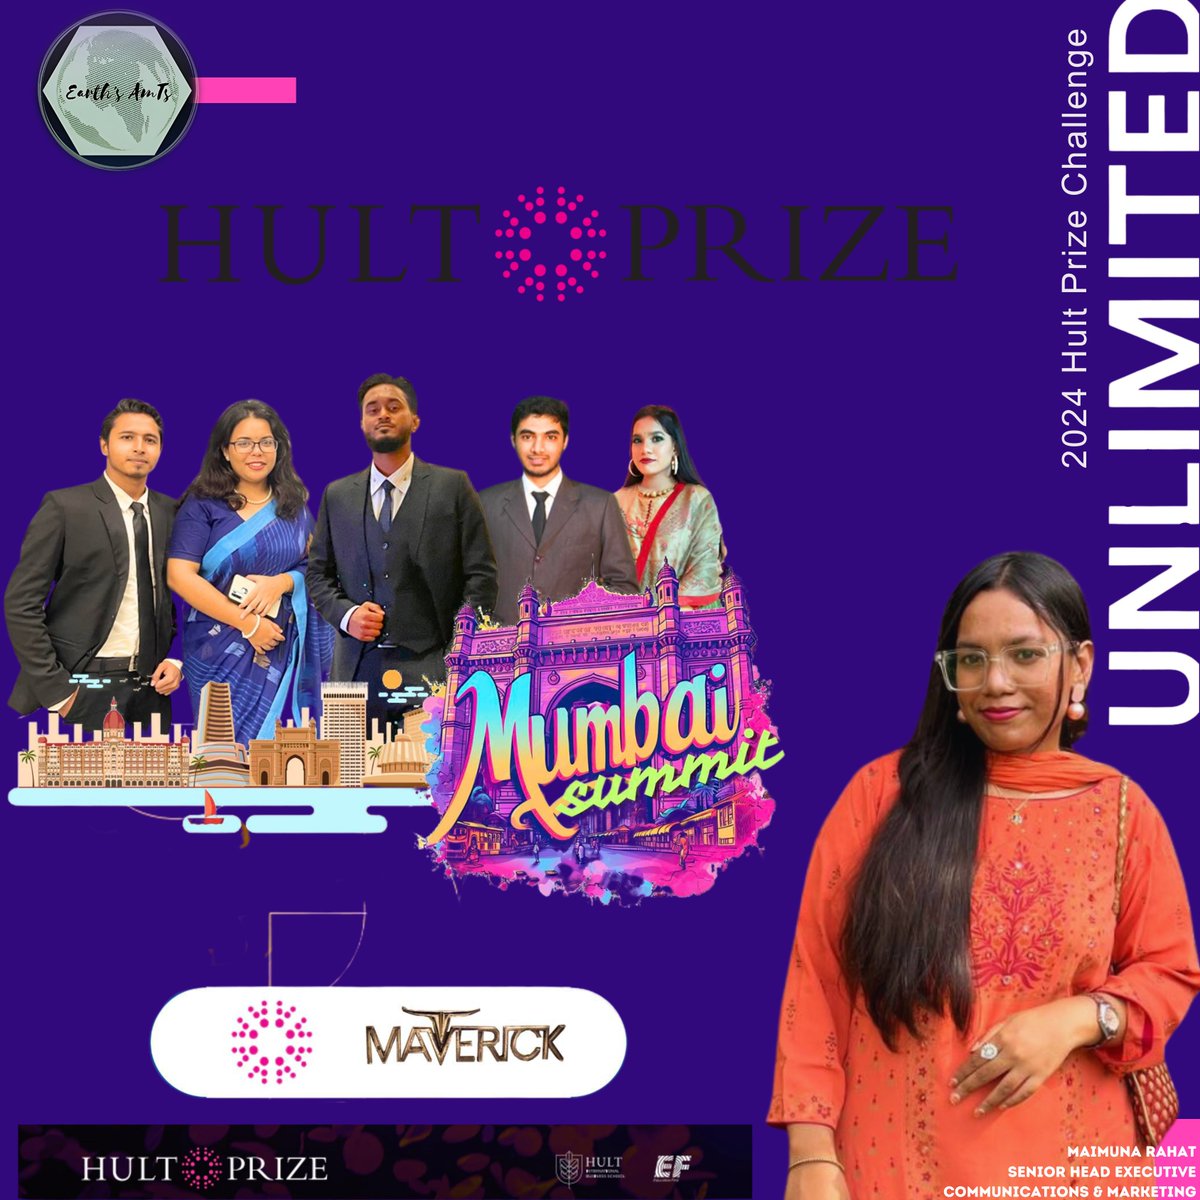 Congratulations to Team Maverick with the concept and prototype 'Paperluxe Furniture' made from wasted papers for reaching the grand finale of the Hult Prize'24, Mumbai Summit, Being ONE of the TOP 300 among 10,000 startups! #earthsantsorg #recycledmaterials #HultPrize